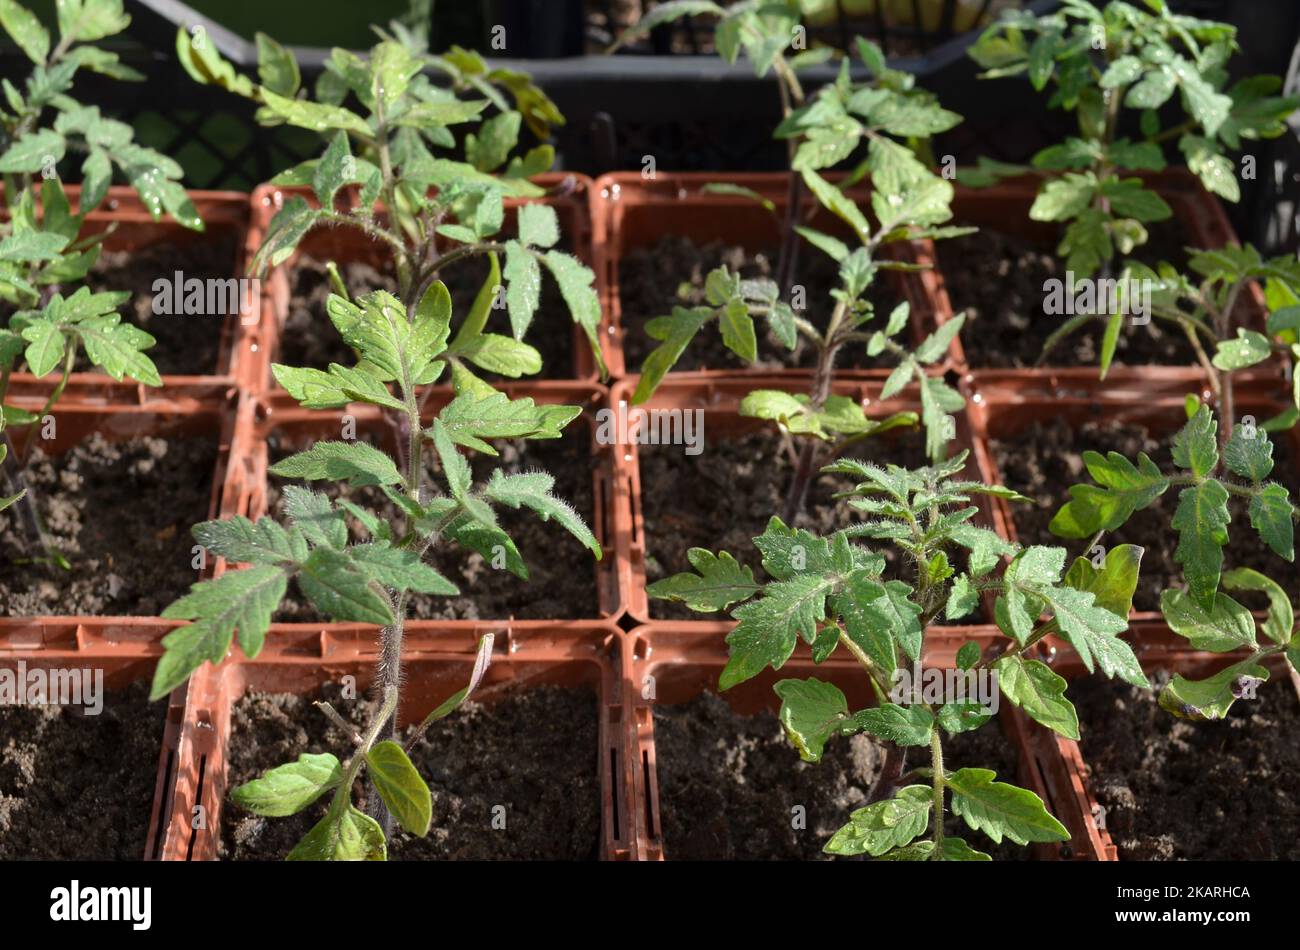 Tomato seedlings in square trays. Concept of growing your own organic food. Stock Photo